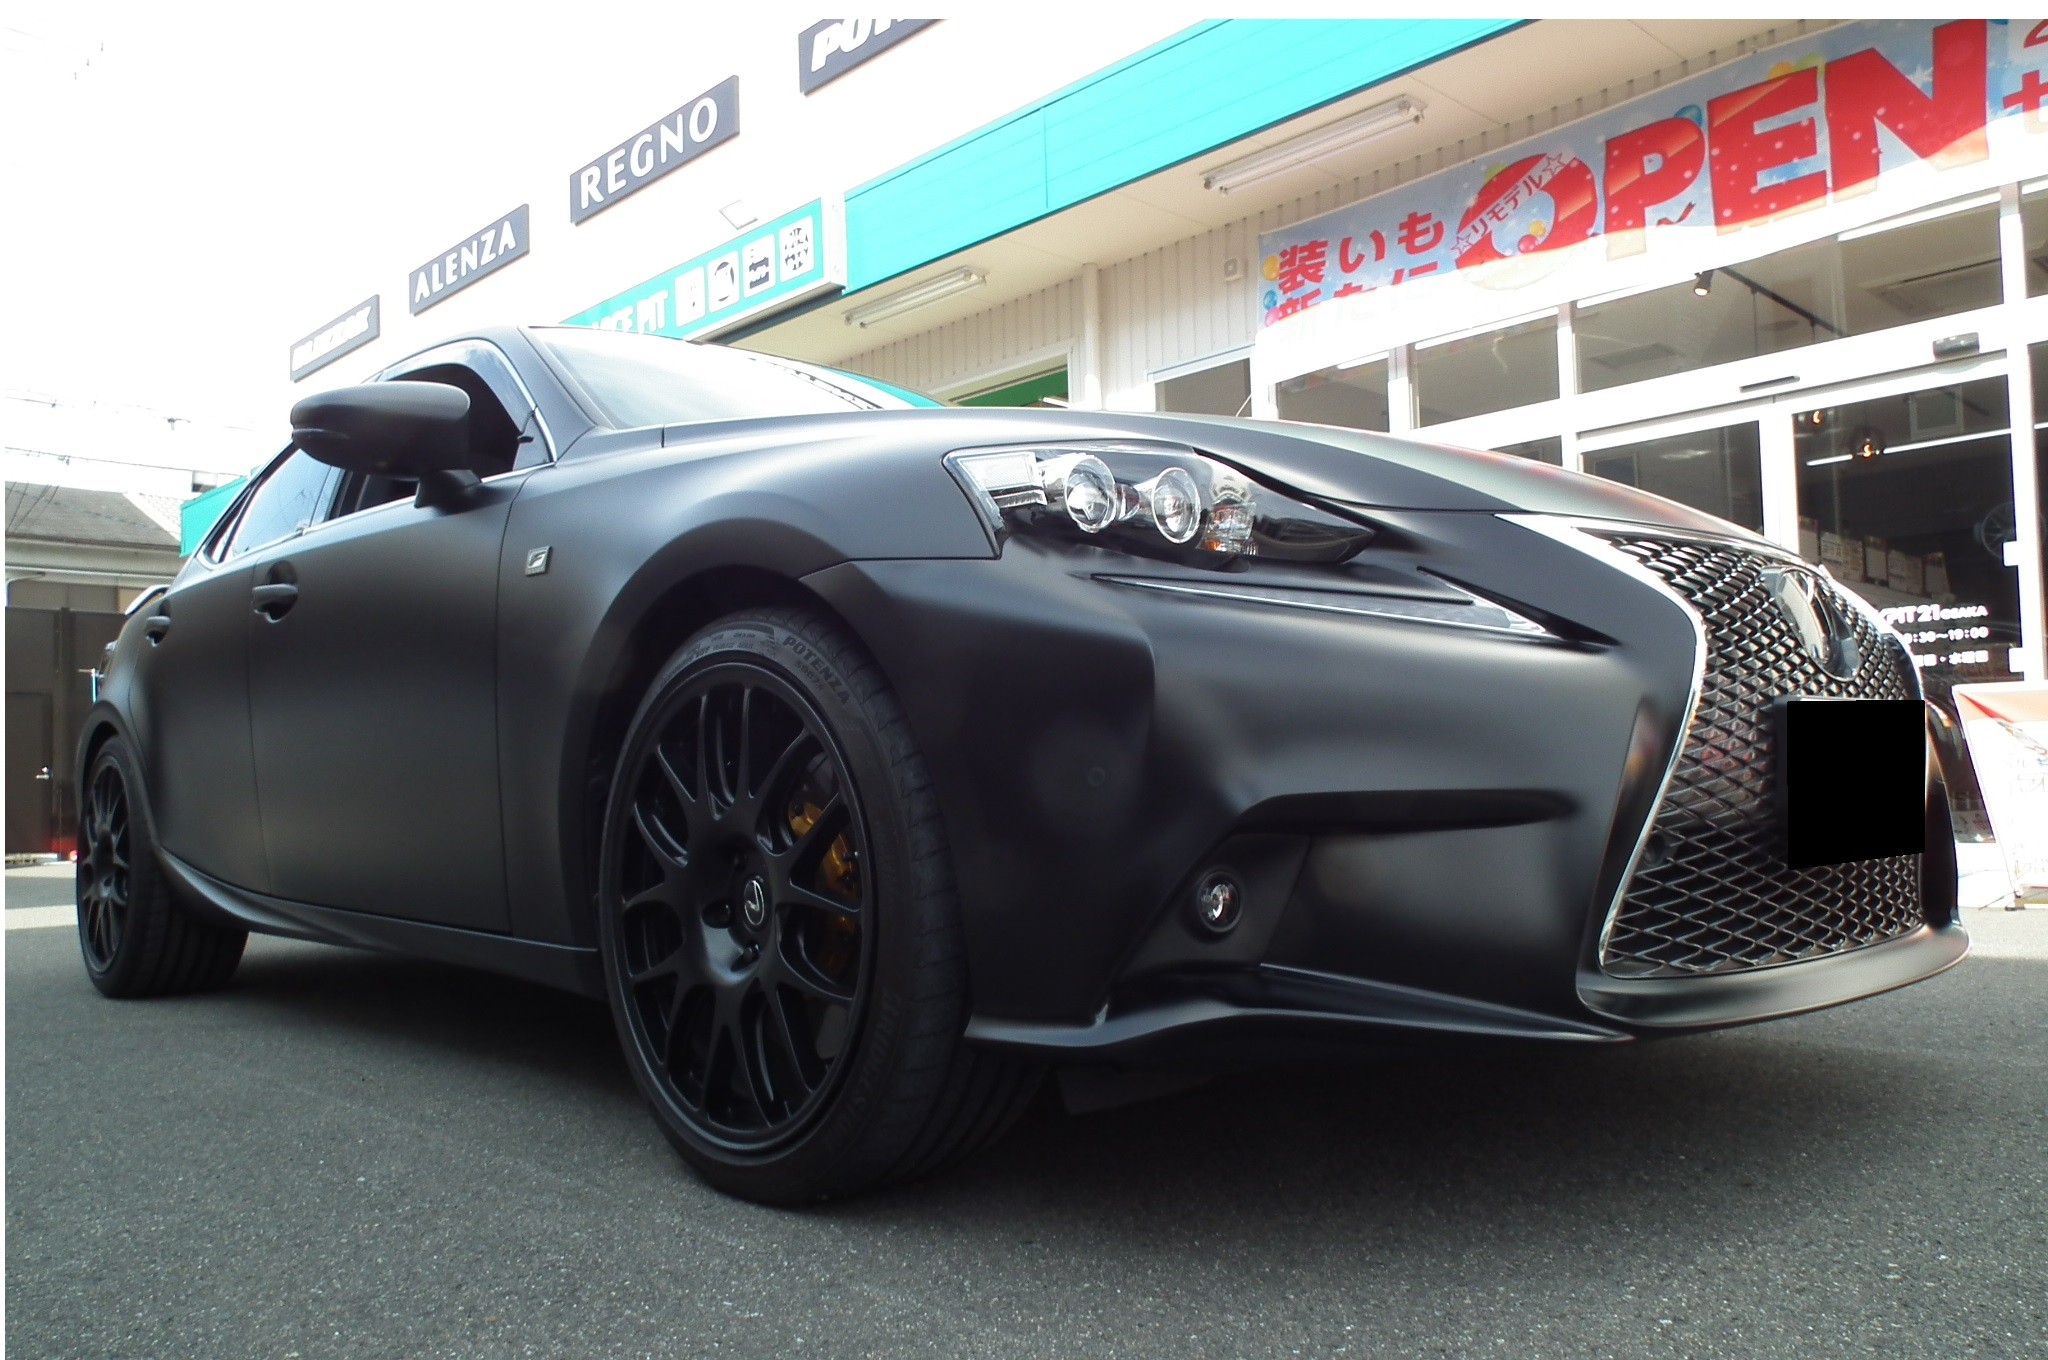 LEXUS IS AVE30 【 SARD LSR WING 】取付作業を紹介。 | レクサス IS ...